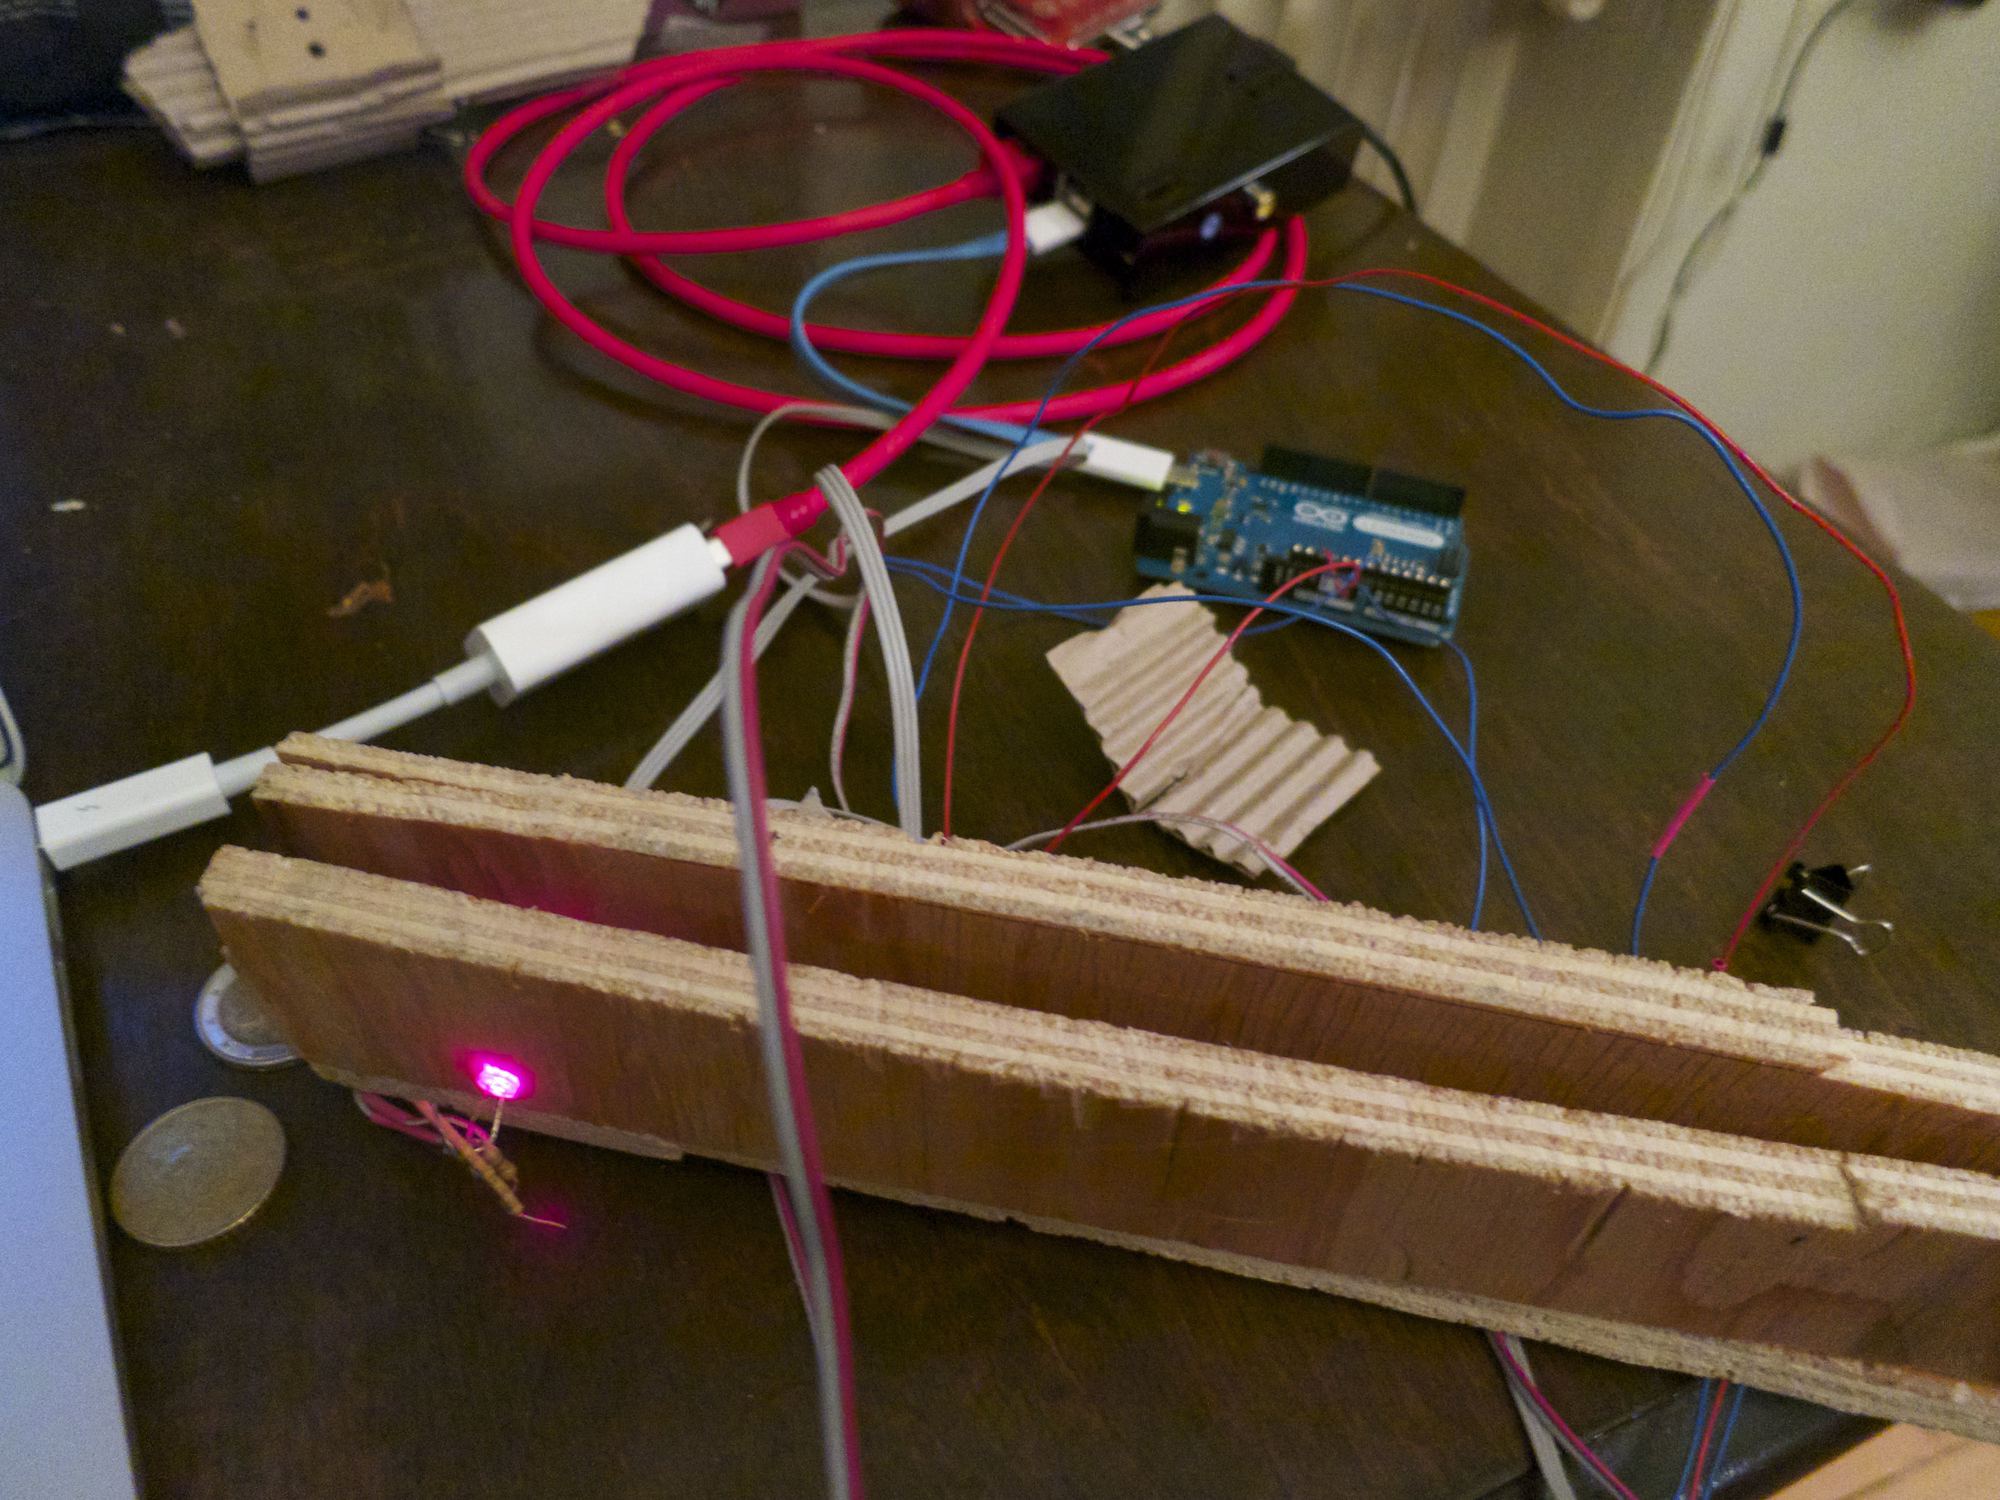 Coin detector 1.1, Arduino and Raspberry Pi.